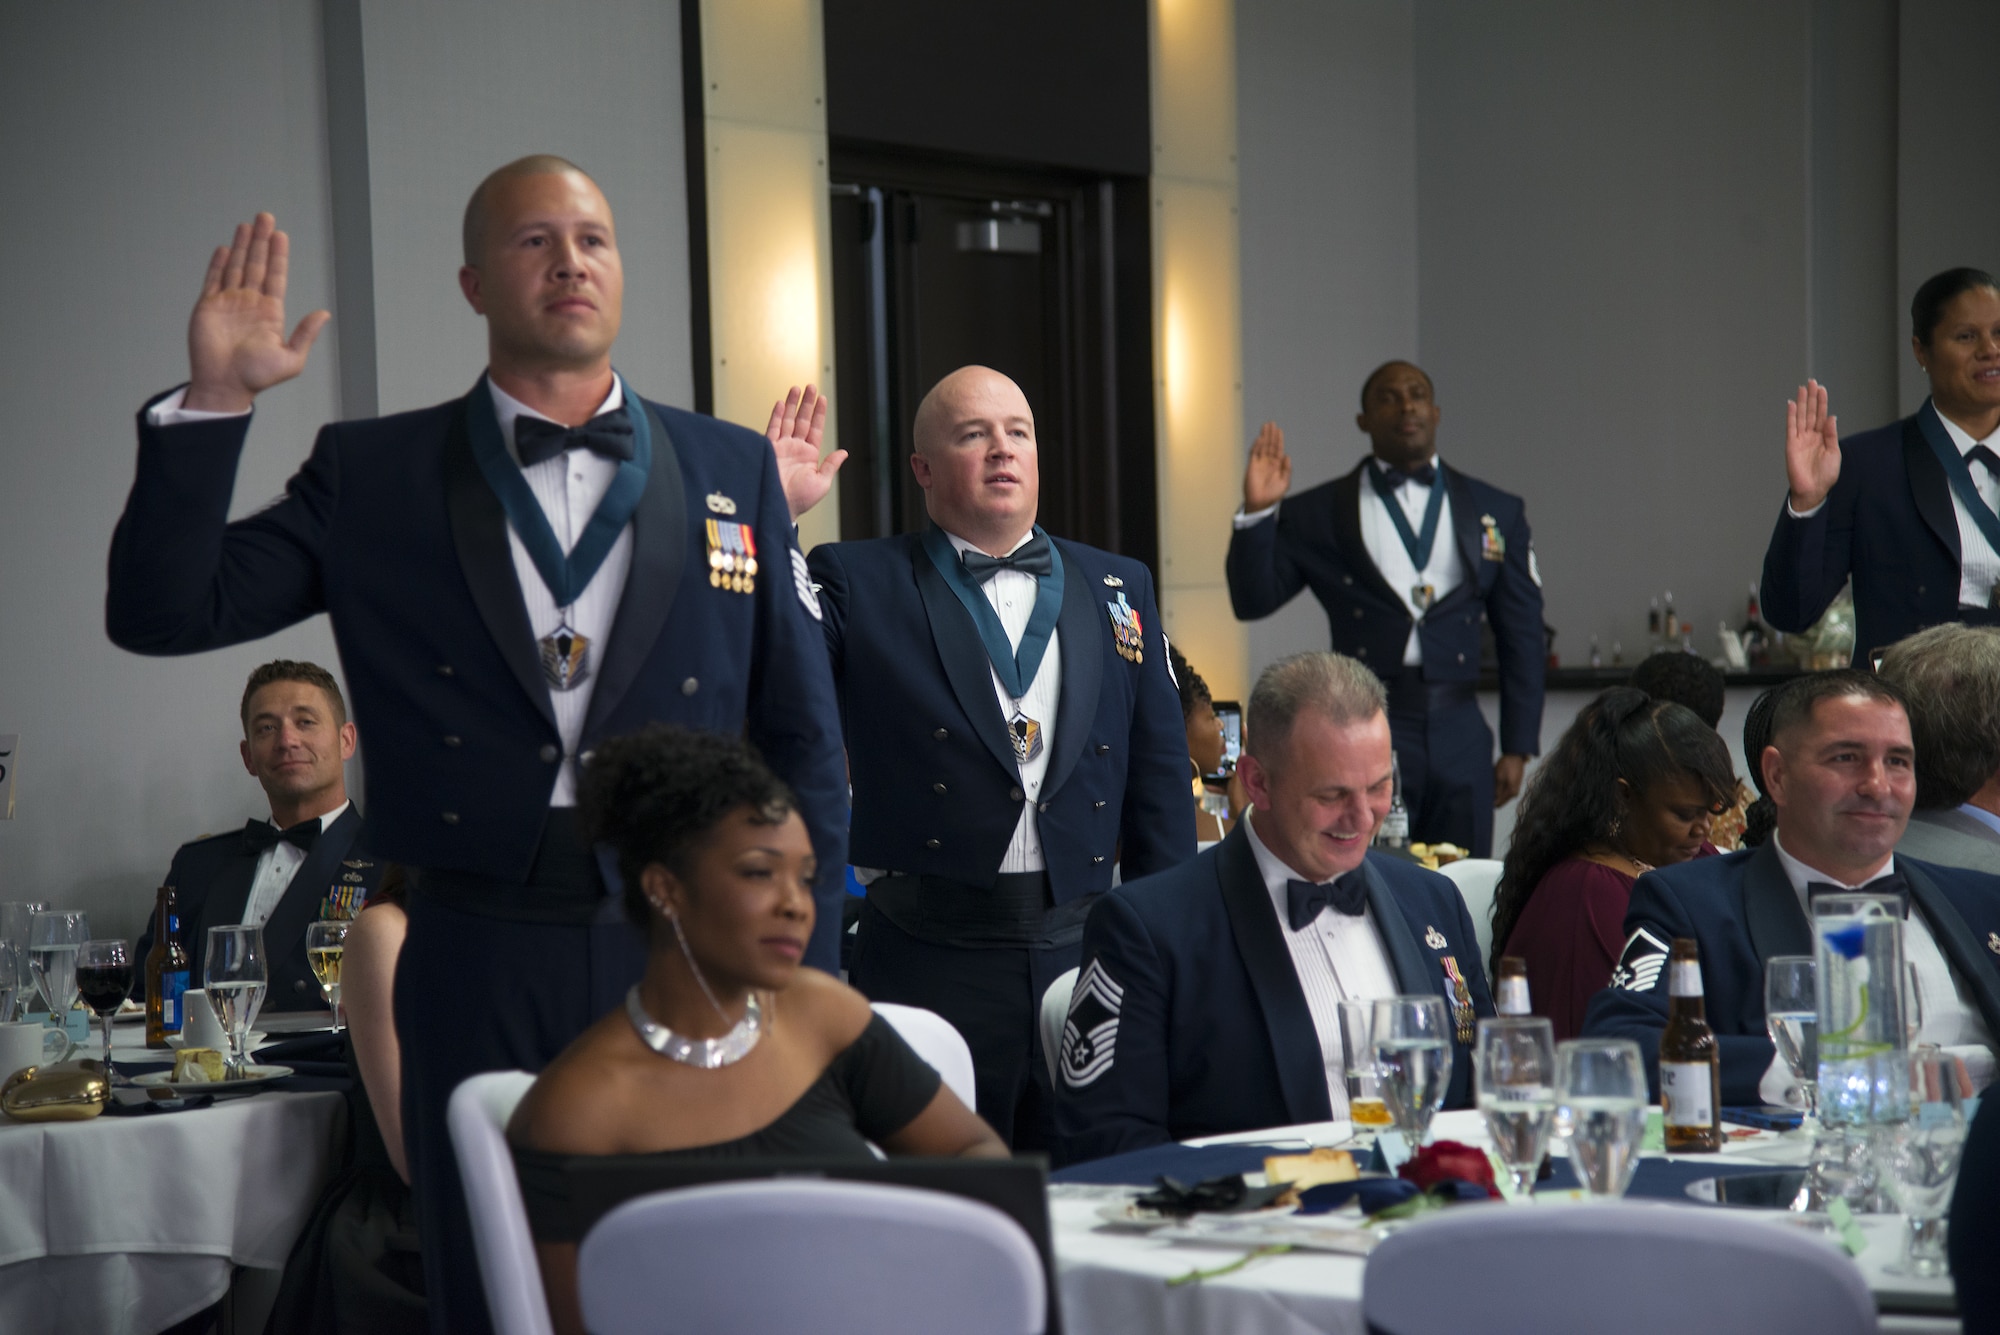 Master Sgt. selects recite the SNCO charge during a SNCO Induction Ceremony at Hotel Alba in Tampa, Fla., Aug 2, 2019. The induction ceremony inductees attended the SNCO Professional Enhancement Seminar to better prepare themselves for their new responsibilities.